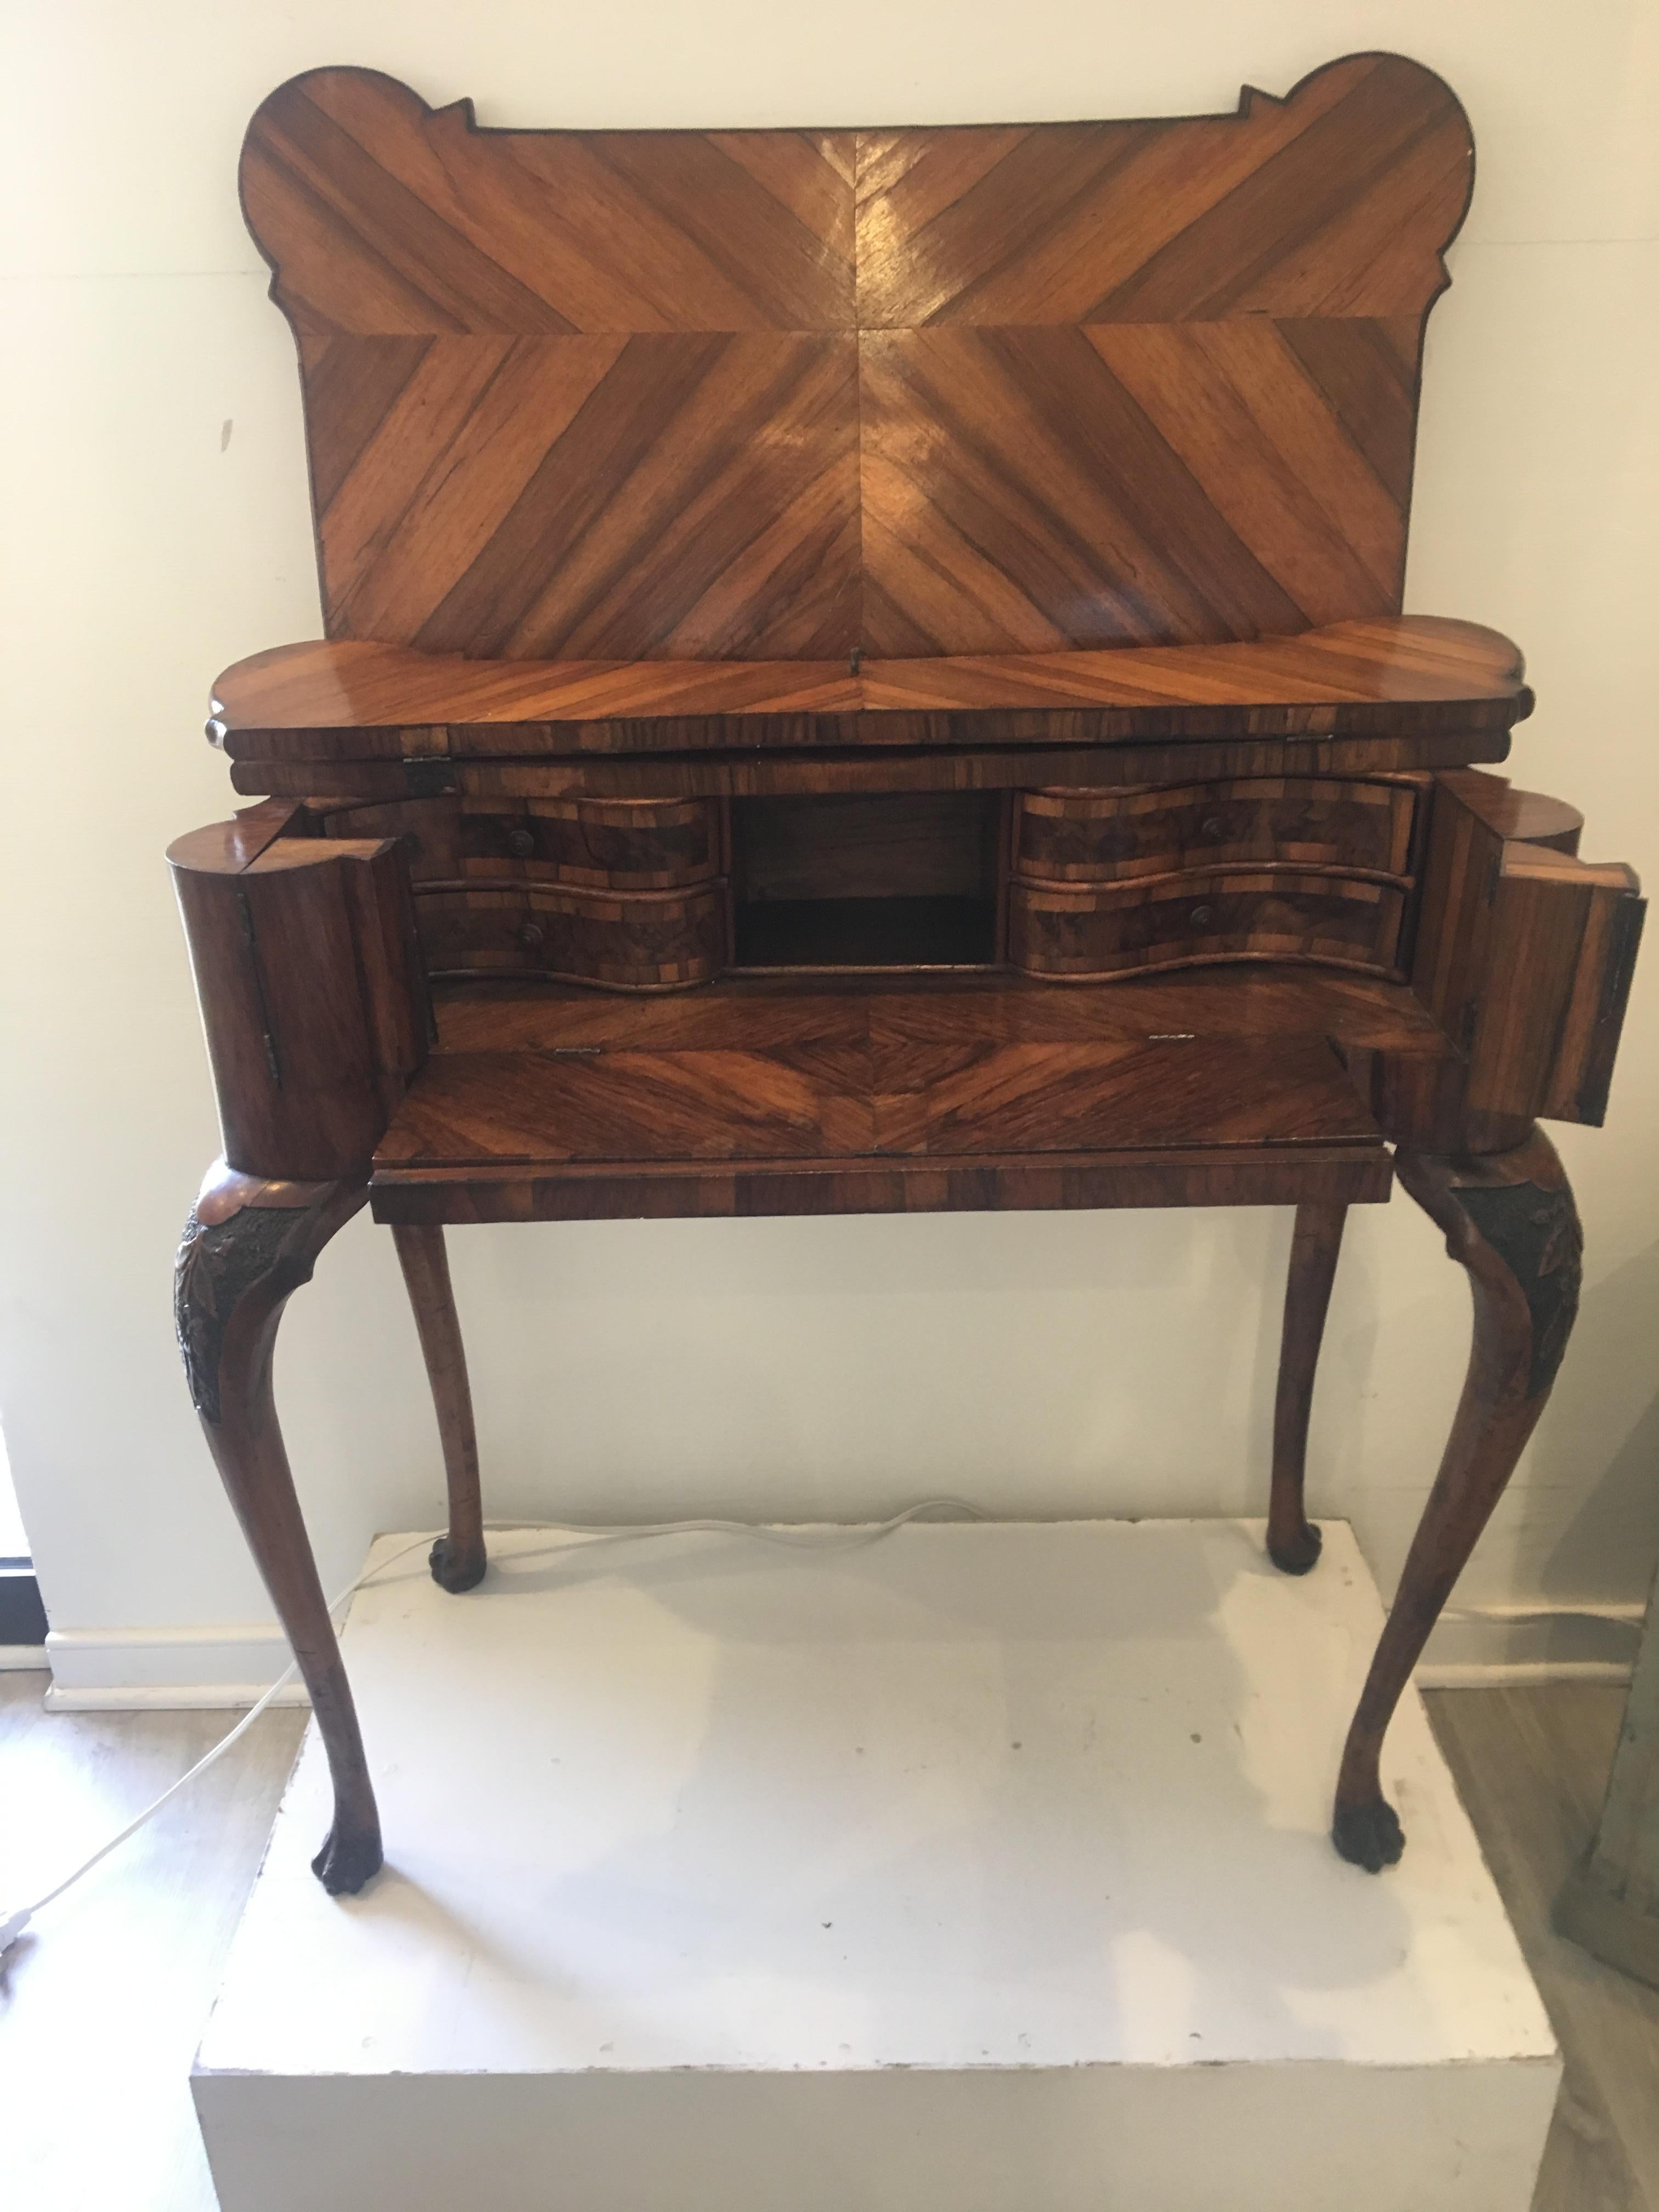 Magnificent 18th century Italian Modena carved and inlaid console table, card table, desk, circa 1750. Highly figured veneered and inlaid with other woods. Similar examples of this card table are published in the Graziano Manni, Mobili Antichi in